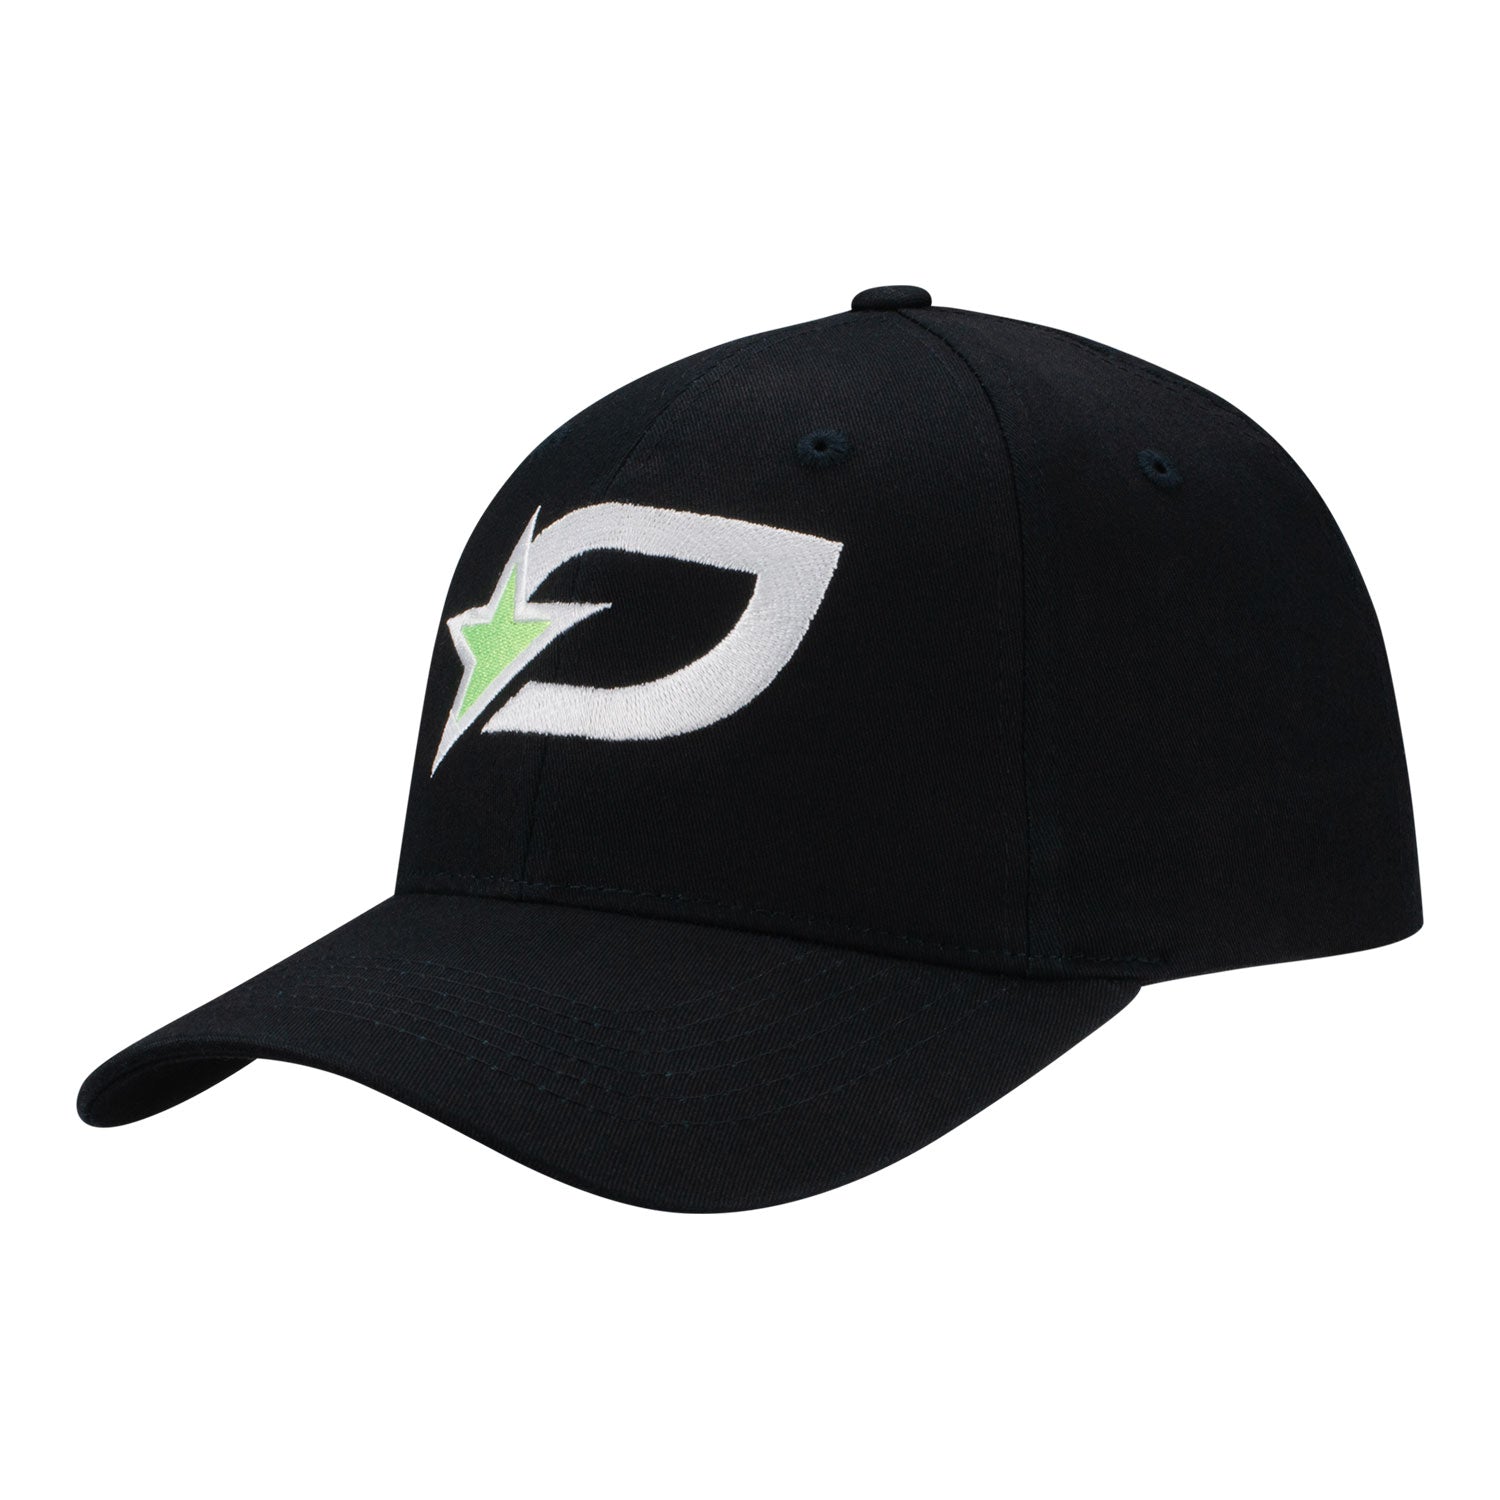 Optic Texas Black Dad Hat - Front Left Side View